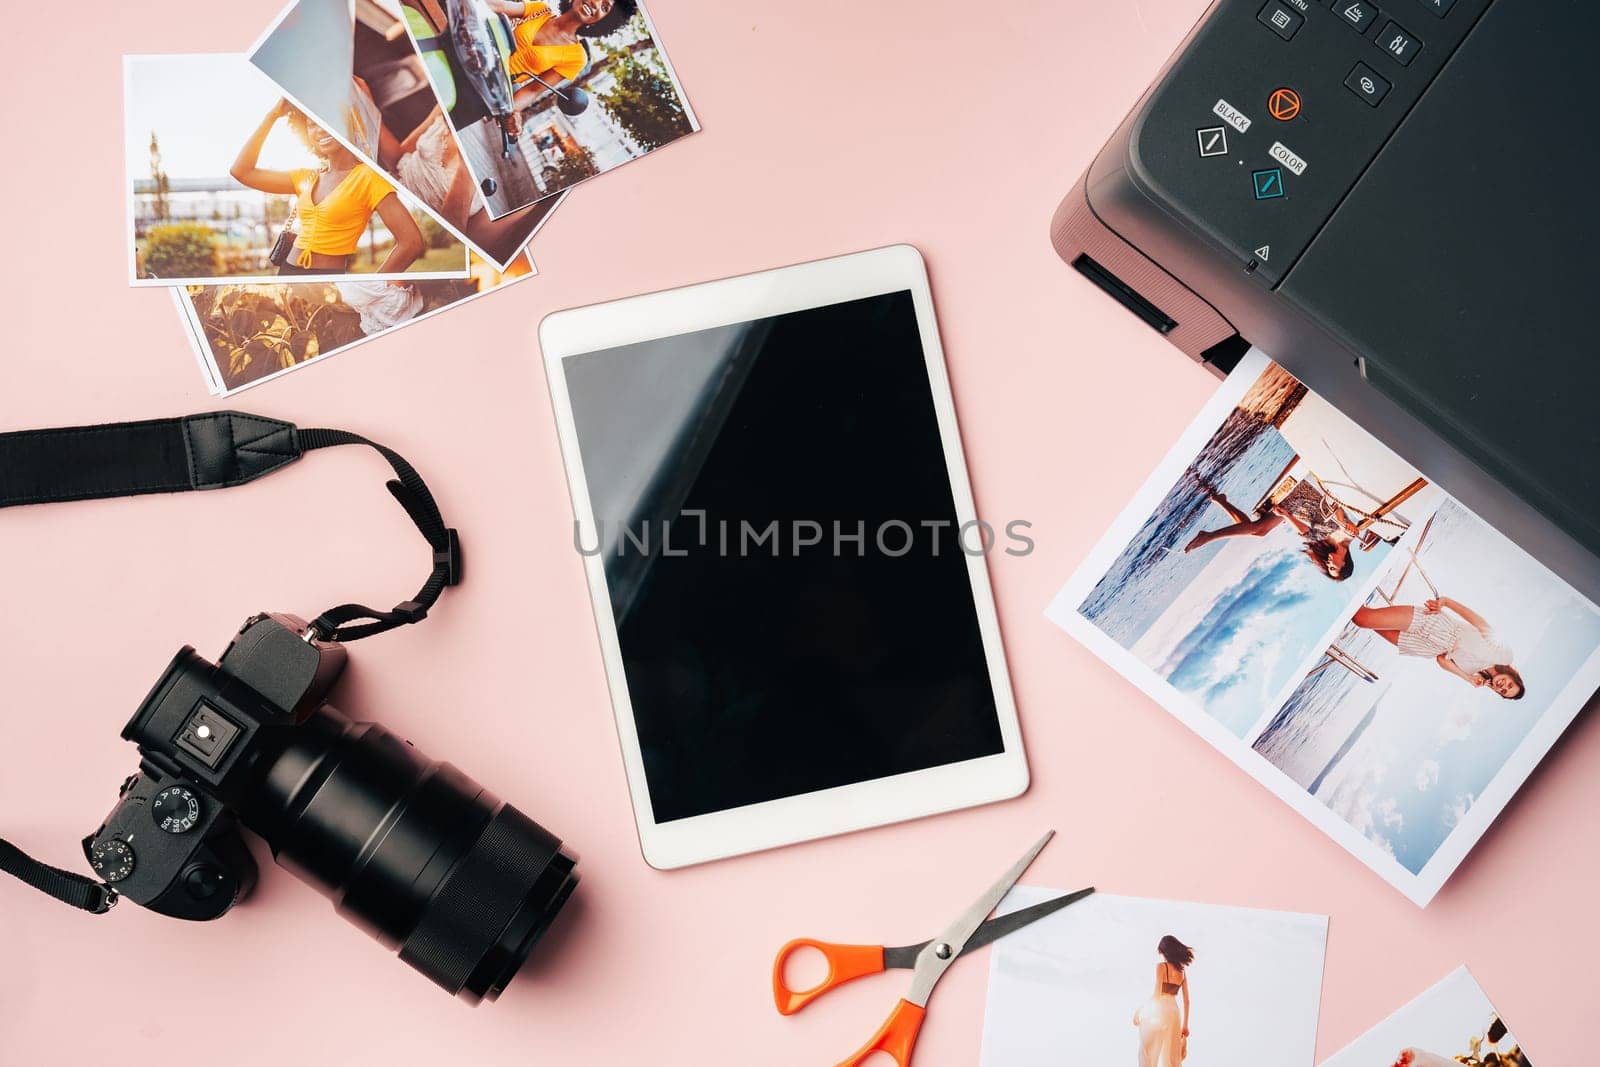 Printer, photo camera and digital tablet on the table. Printing photos concept